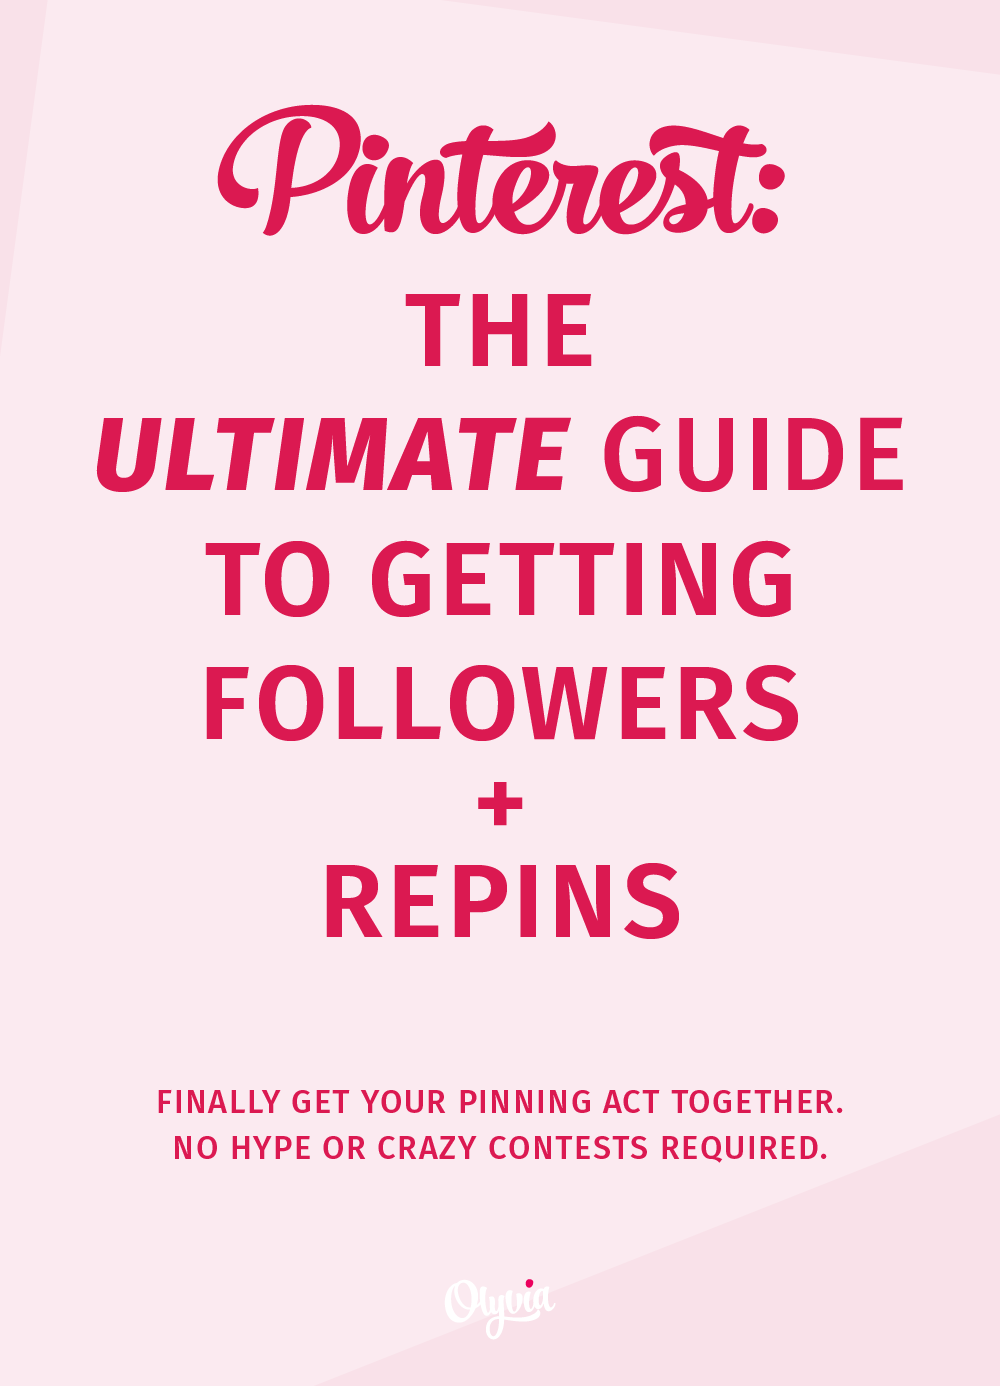 How to get more followers and repins on Pinterest: the Ultimate (hype-free!) Guide that will tell you everything you need to know to build a popular Pinterest account